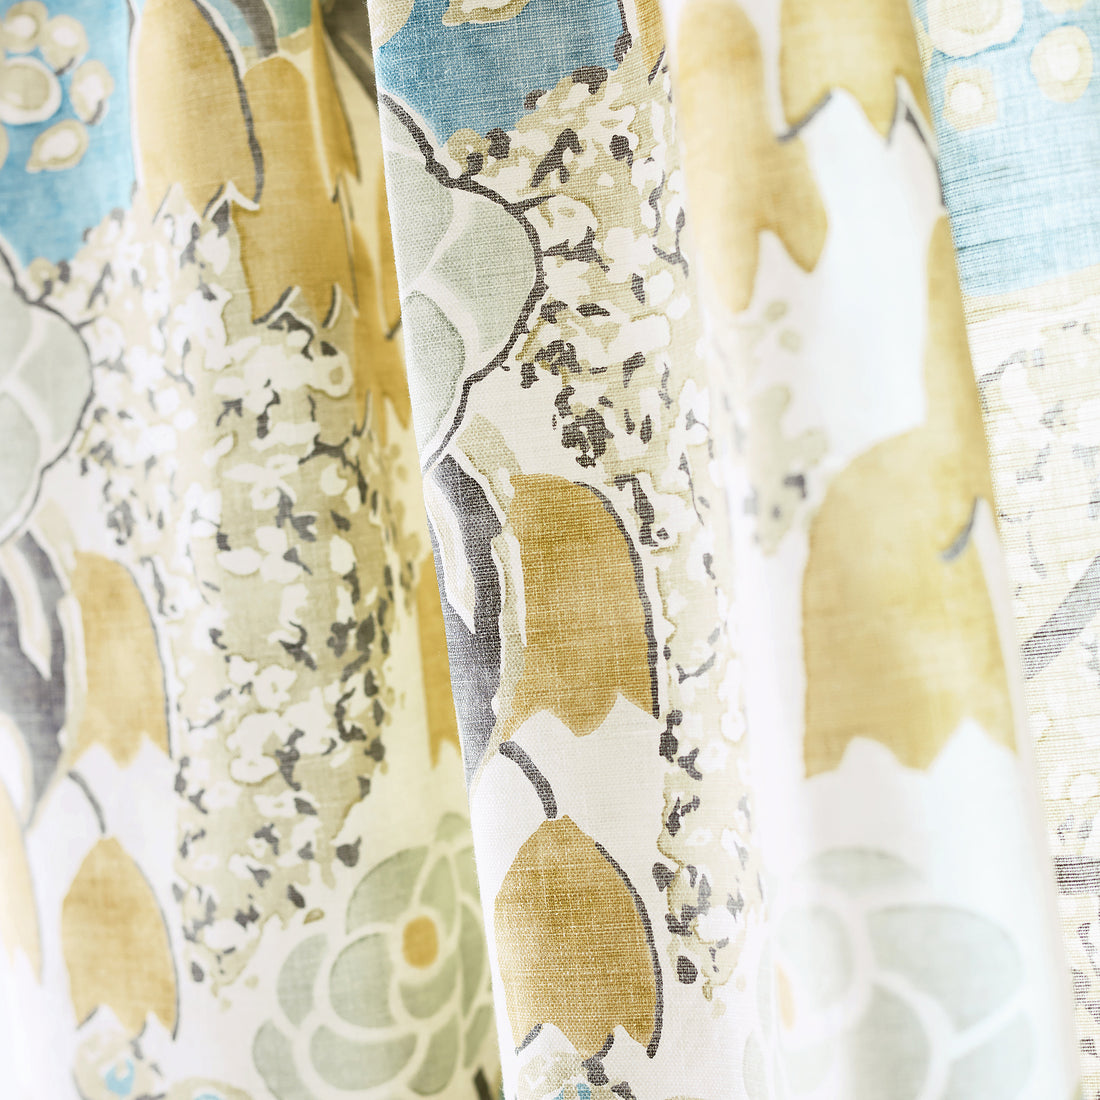 Detail of Laura printed fabric in Sage and Gold